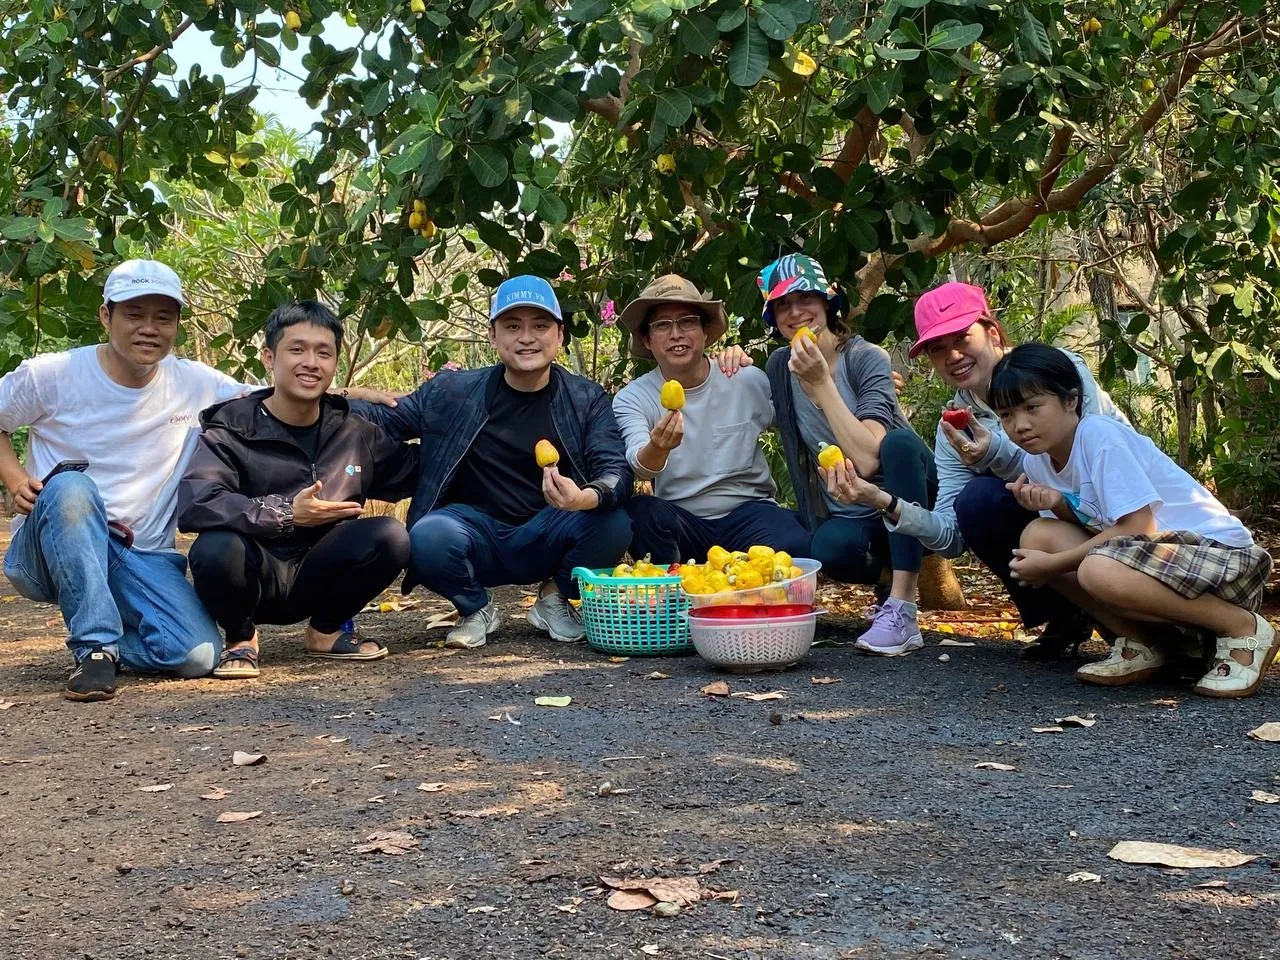 The cashew fruit taste is sweet but slightly astringent - Kimmy Farm Vietnam with our Customers - Happy Monents